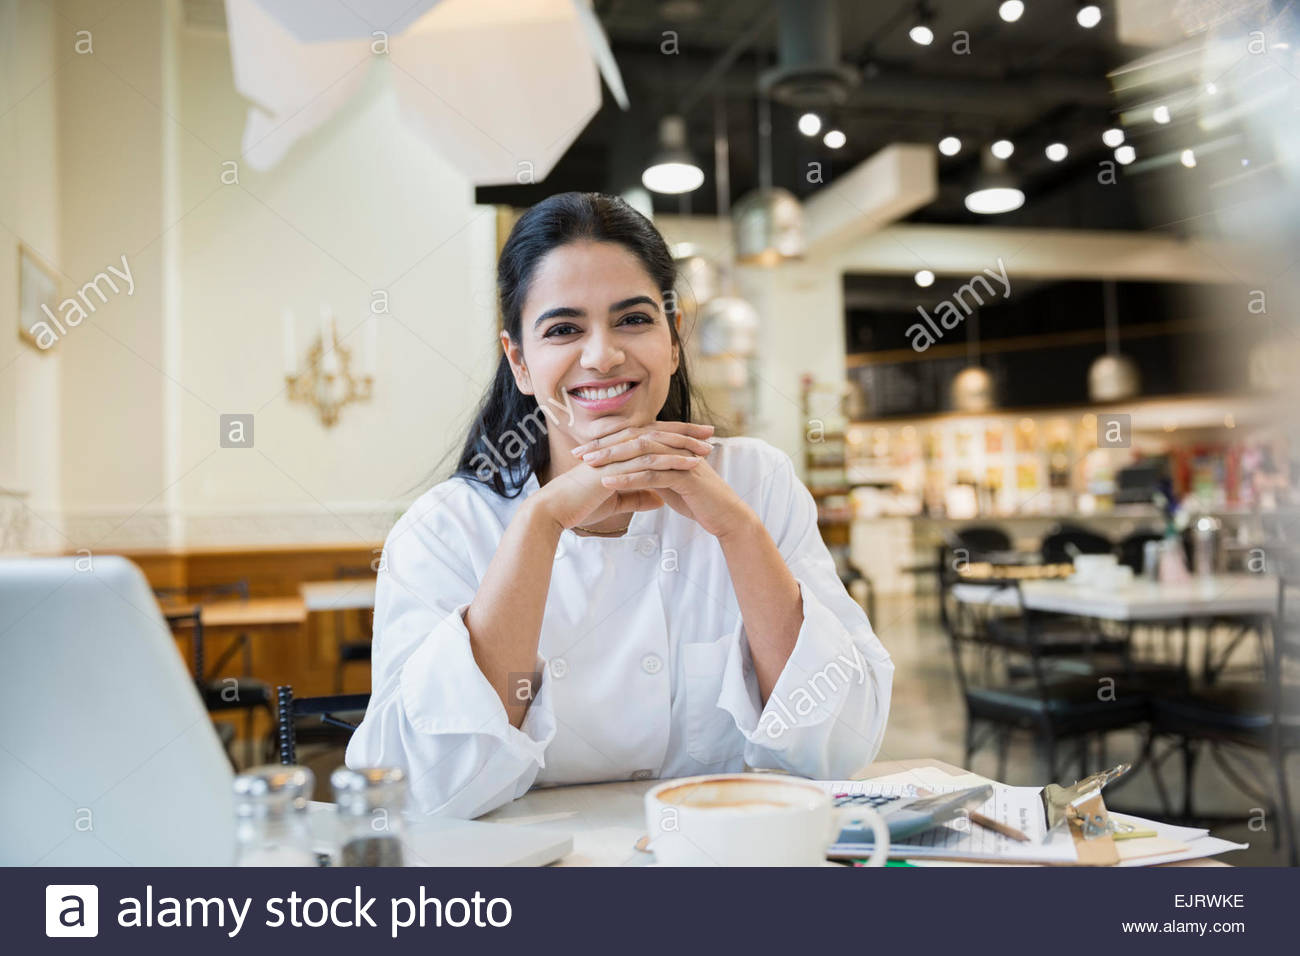 Portrait of smiling chef at laptop in cafe Banque D'Images